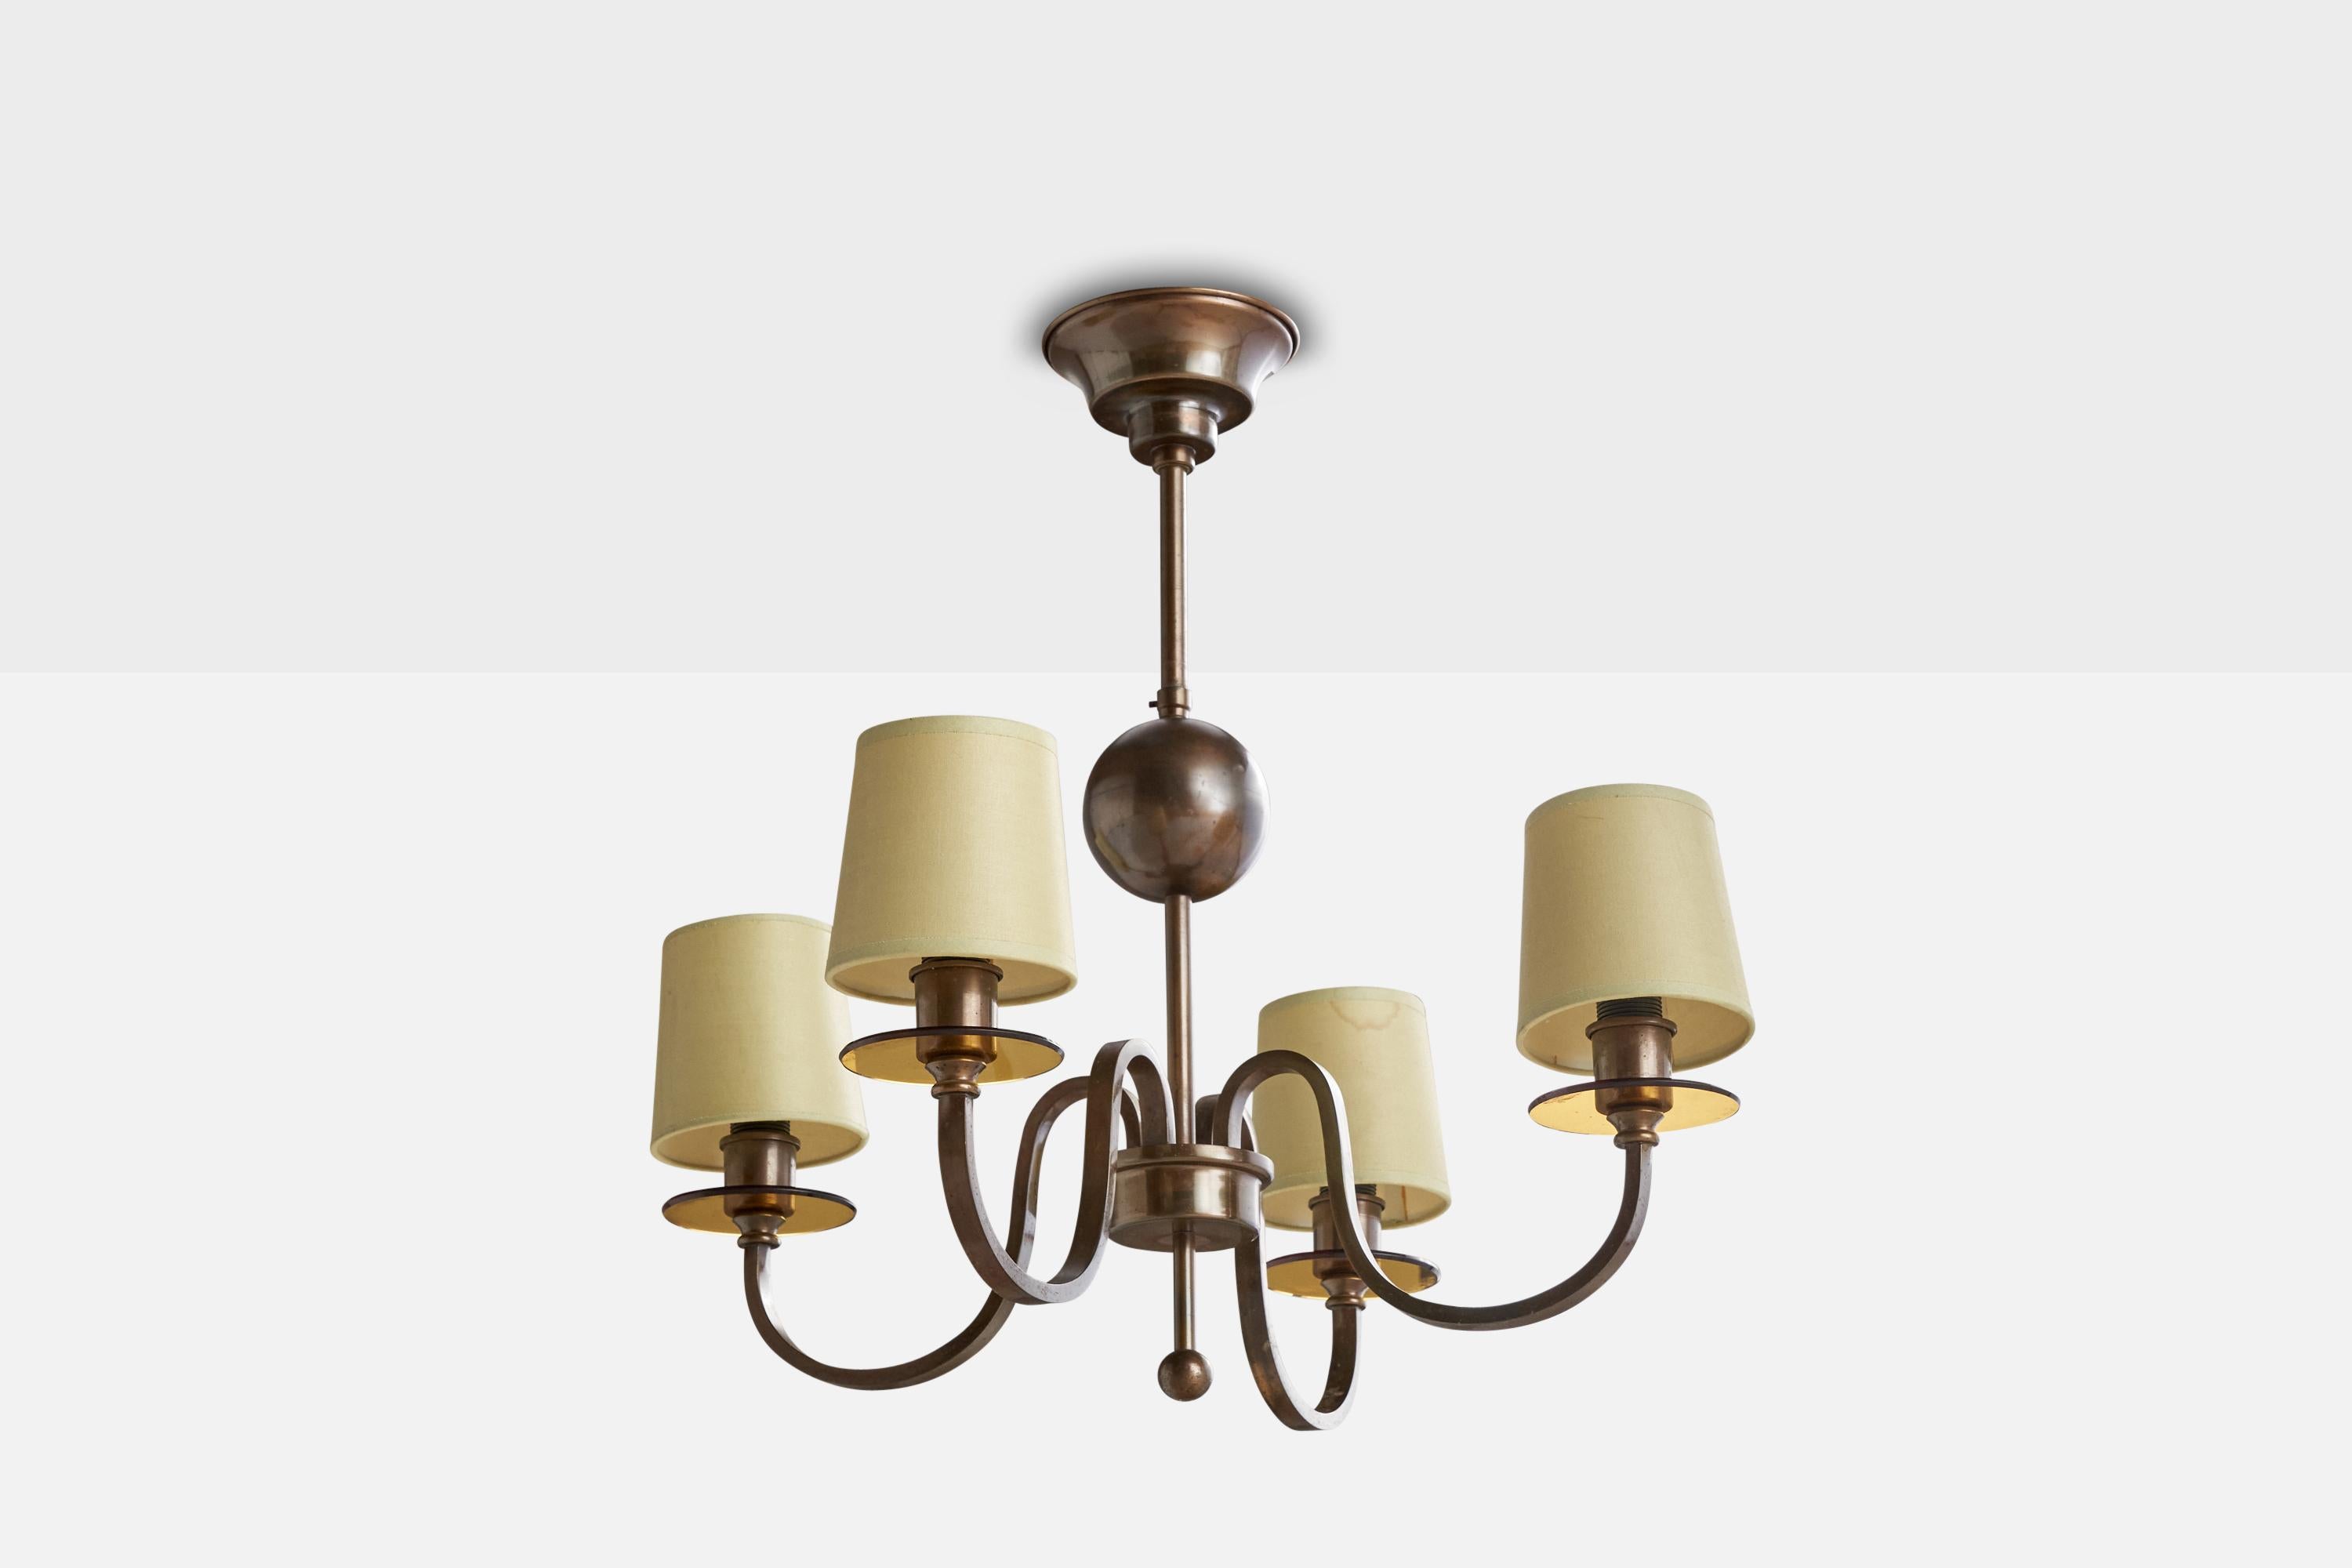 A brass, fabric and brown glass chandelier designed and produced in Italy, c. 1930s.

Dimensions of canopy (inches): 4.79” H x 2.98” Diameter
Socket takes standard E-12 bulbs. 4 socket.There is no maximum wattage stated on the fixture. All lighting